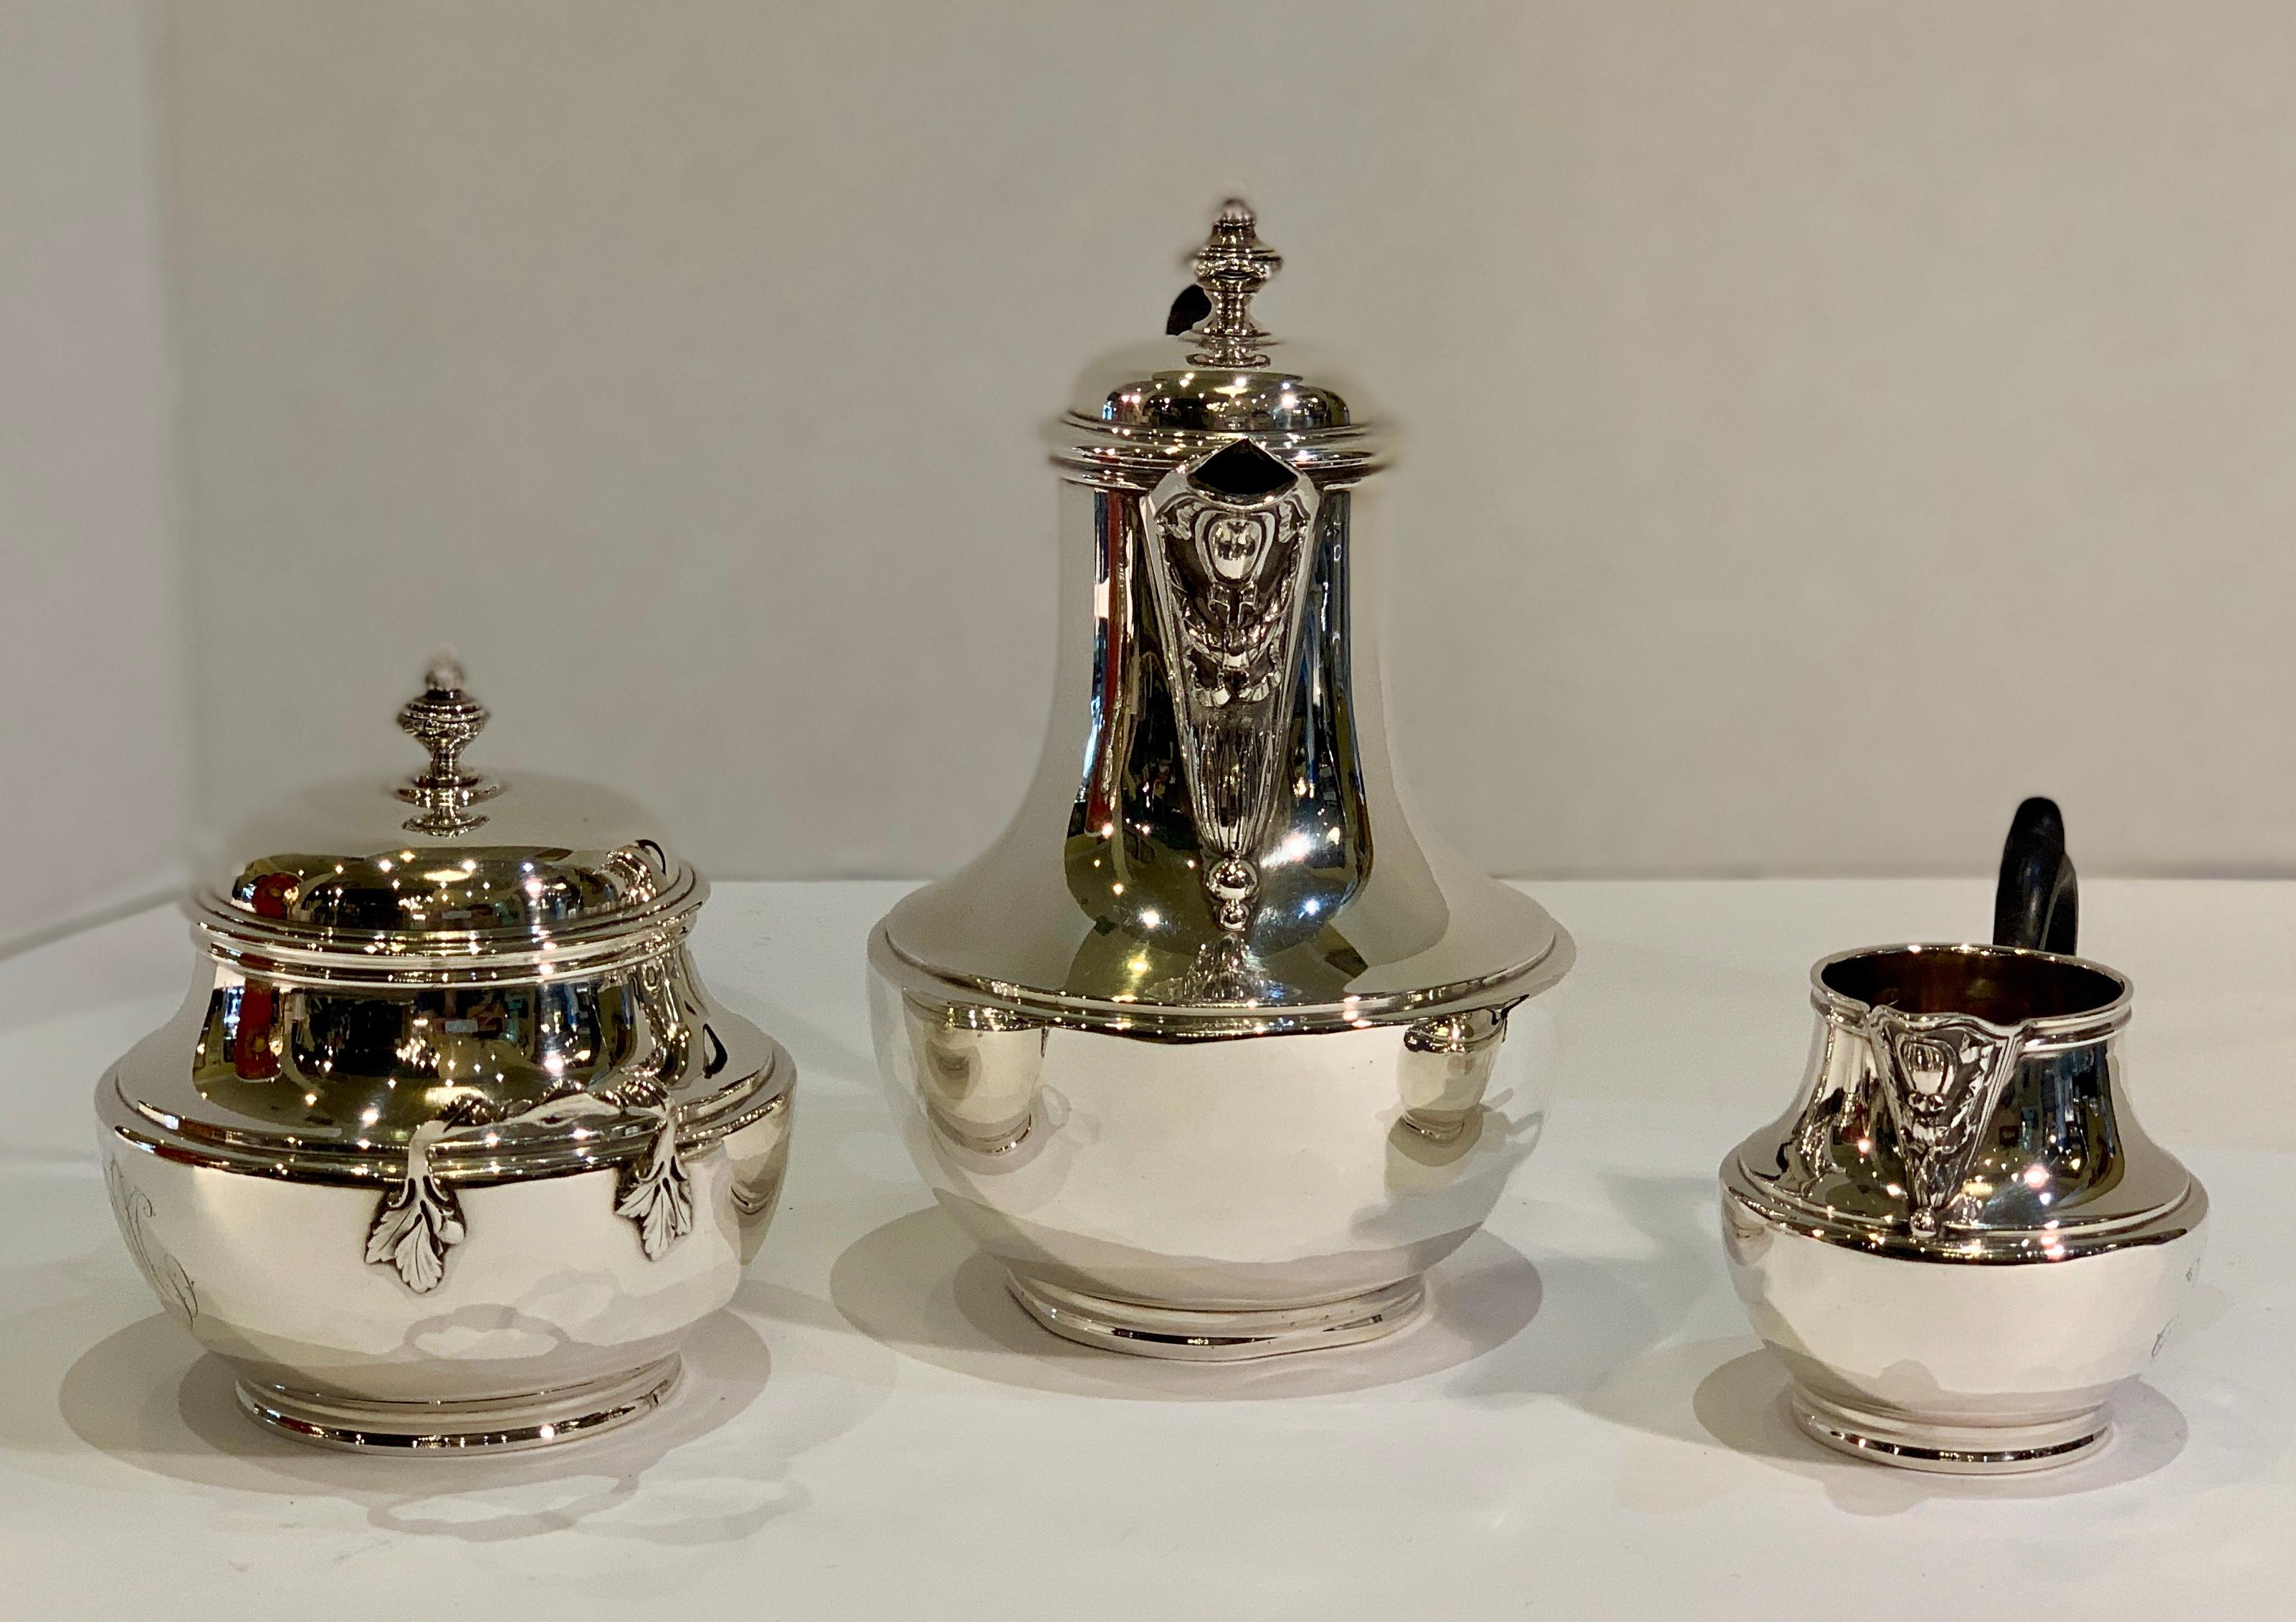 This exquisitely beautiful sterling silver coffee or tea breakfast service by Odiot Paris will create a refined ambiance for your table. Set consists of three matching, handmade pieces from the early twentieth century. The small serving vessel for